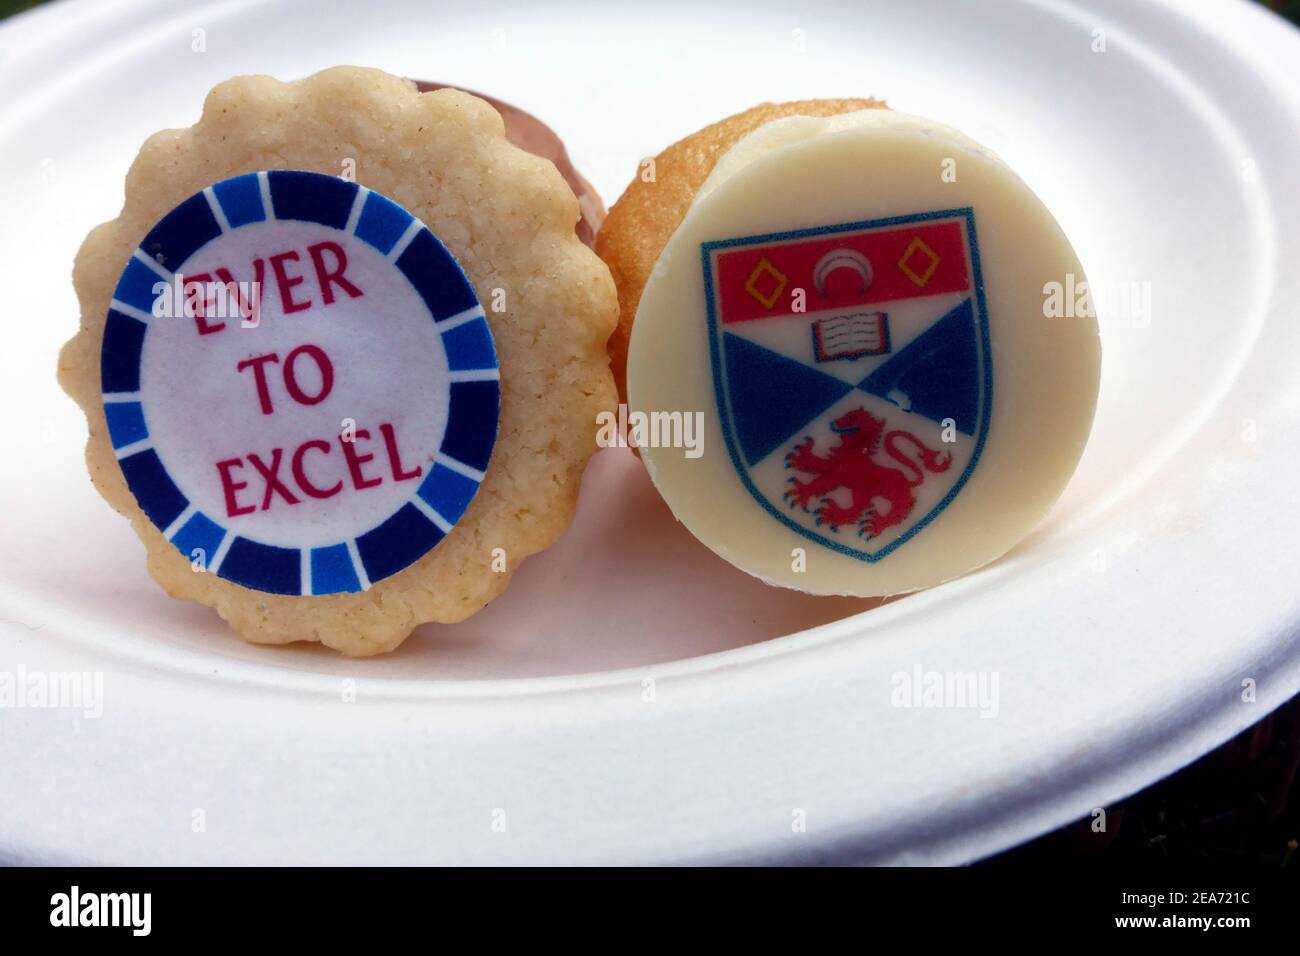 St Andrews university moto and shield on biscuits at their Graduation ceremony in Scotland Stock Photo